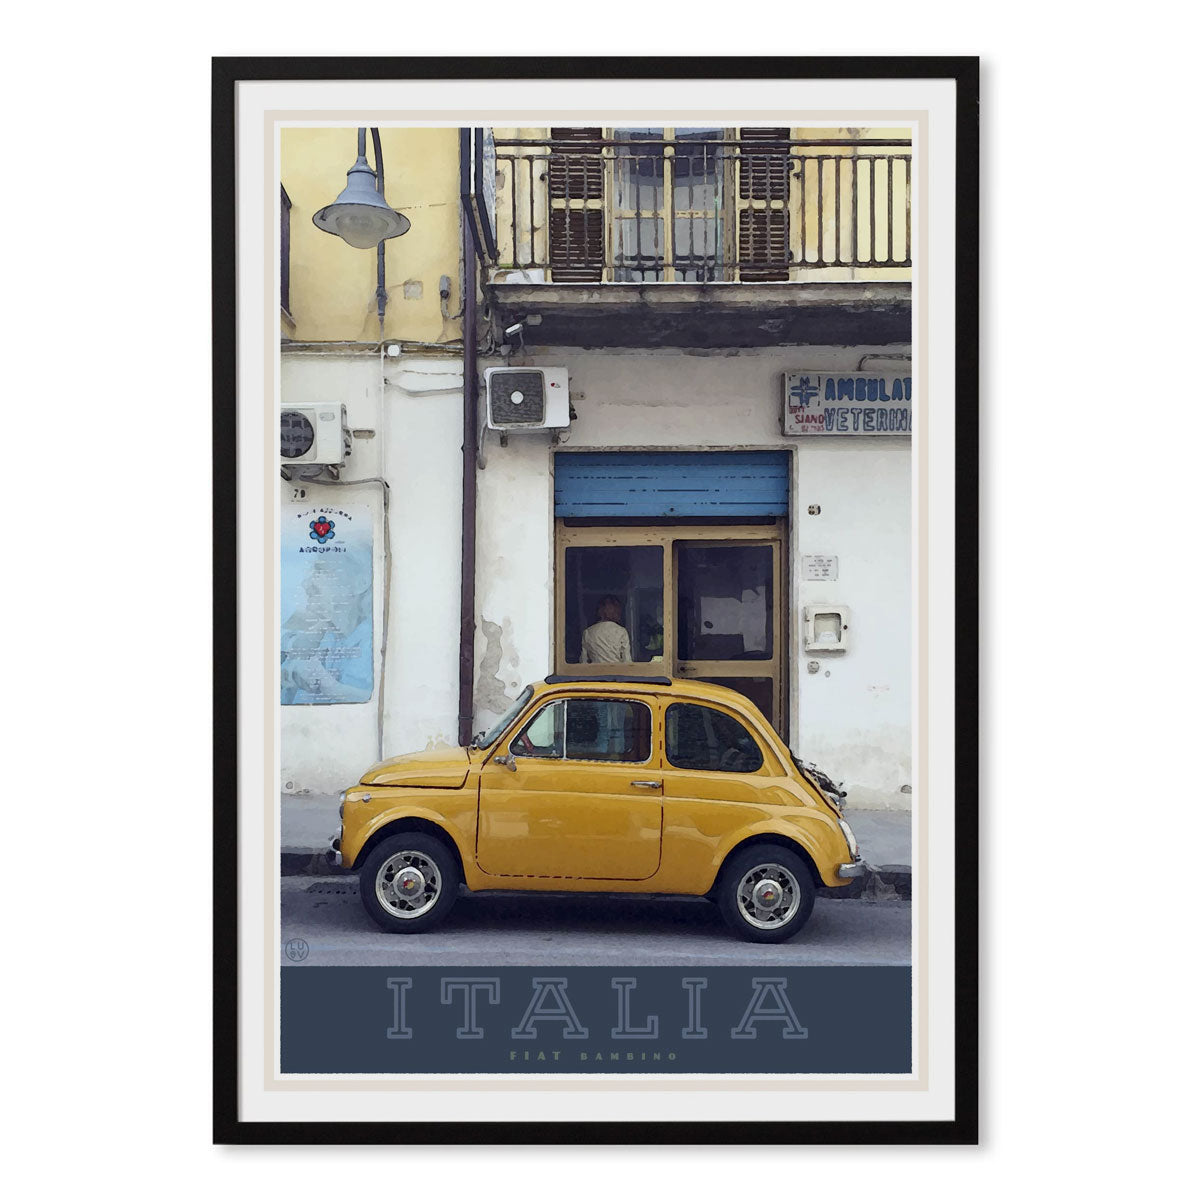 Italian bambino travel style black framed poster - places we luv